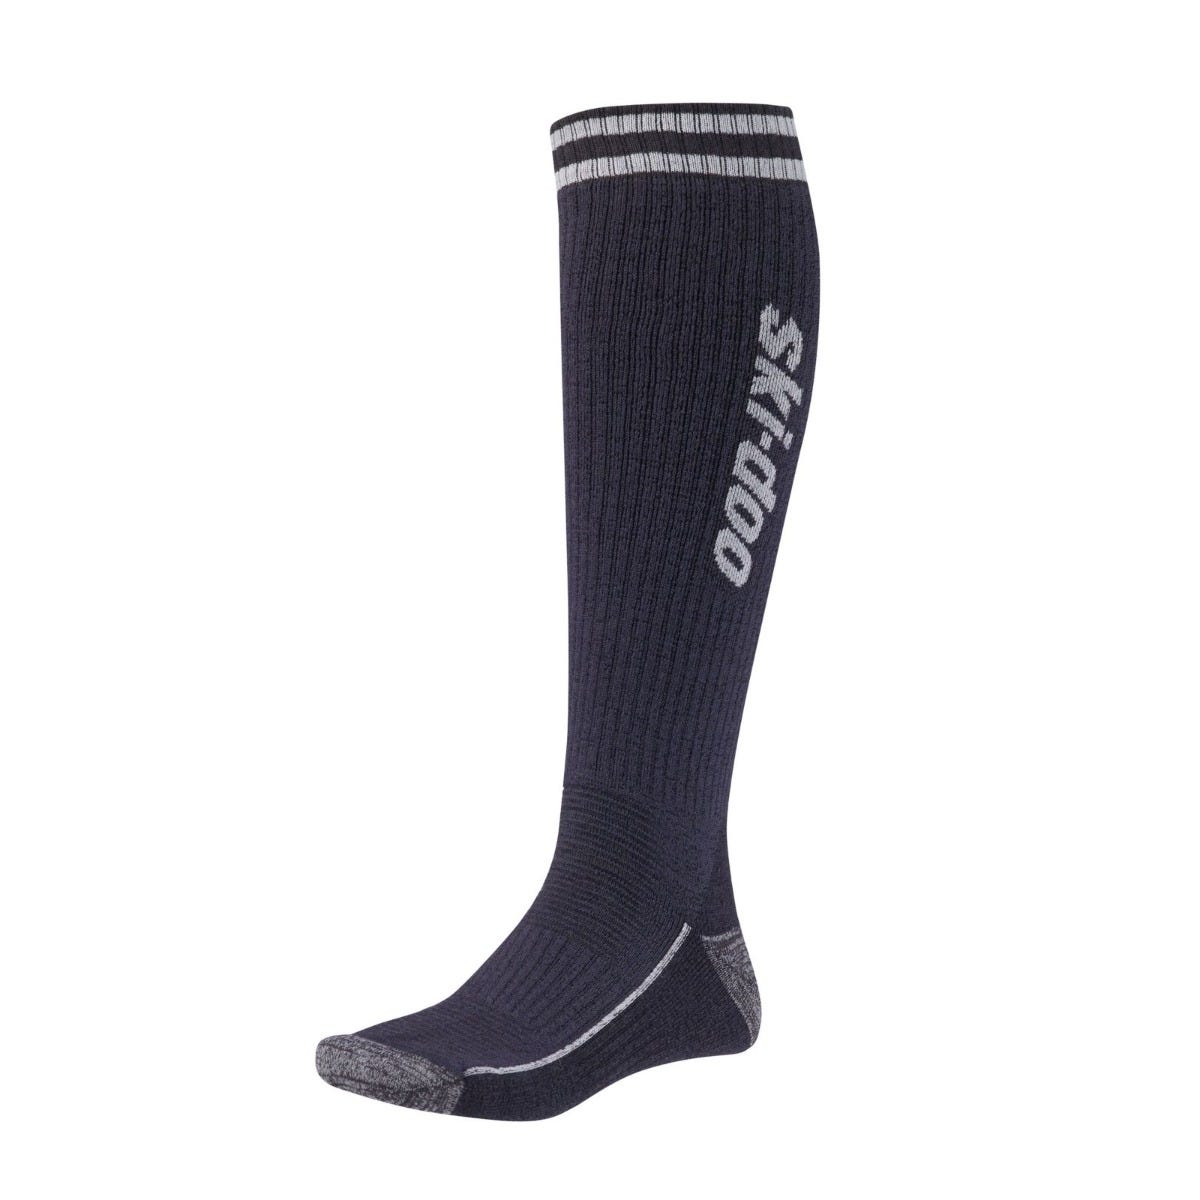 3 chaussettes thermo 43-46 assortie - Tecniba